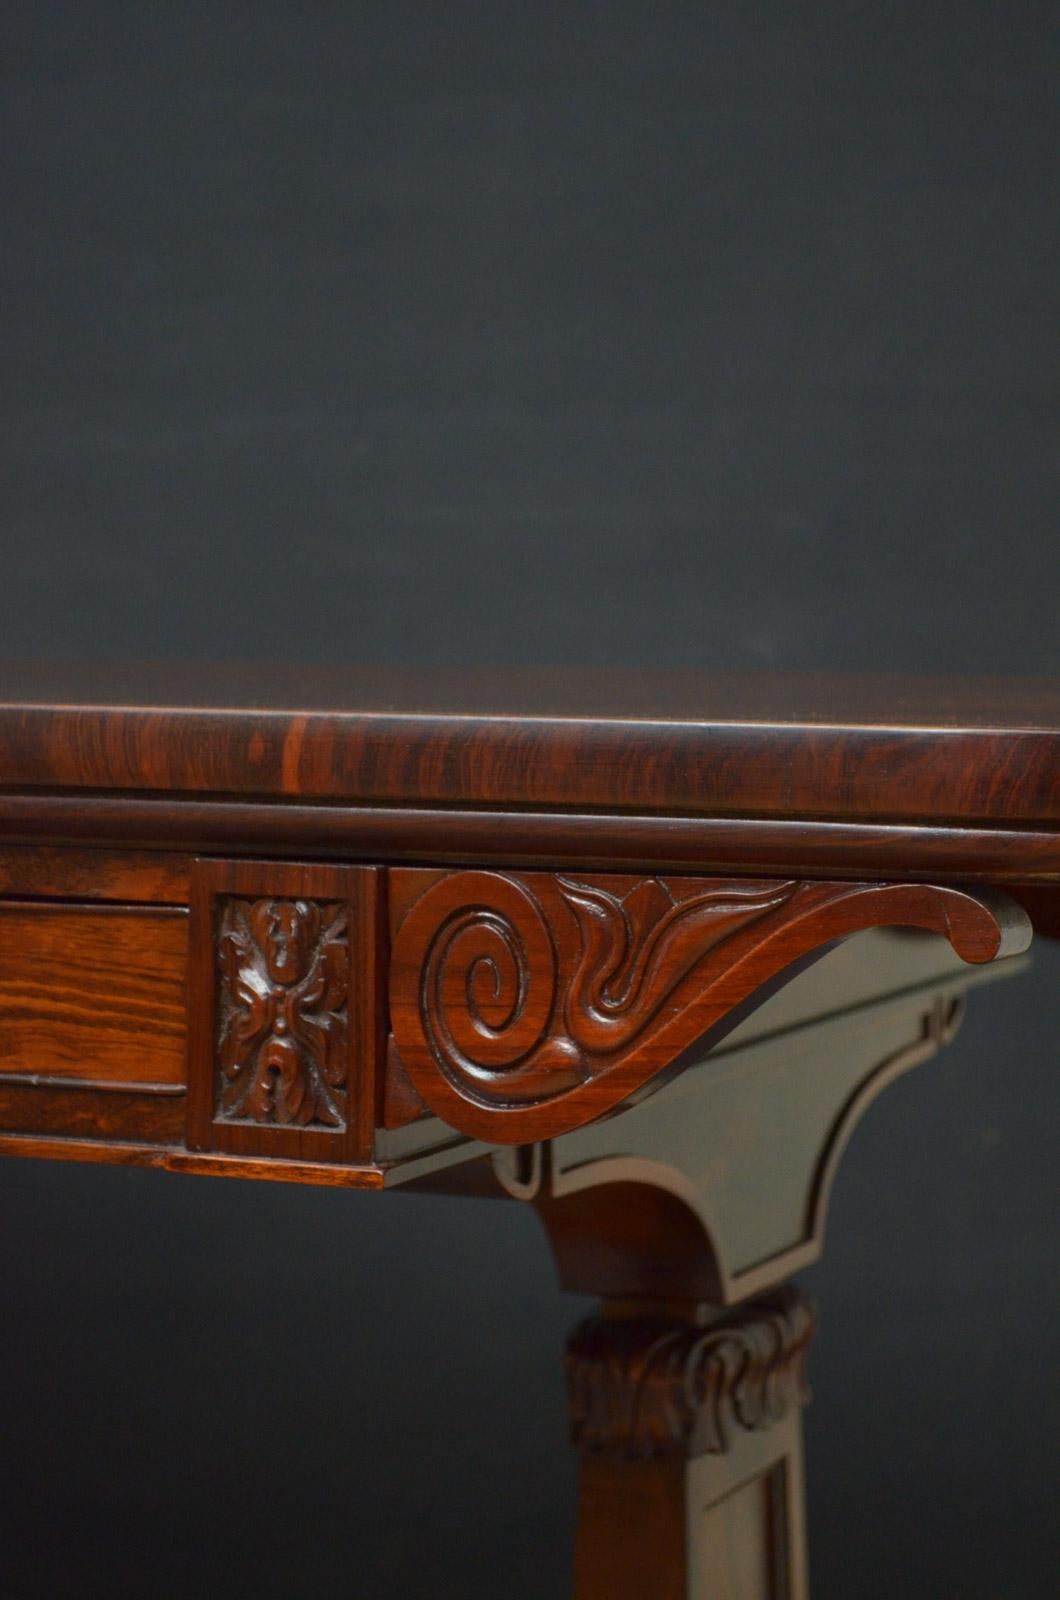 Early 19th Century Exceptional Regency Goncalo Alves Library Table in the Manner of Gillows